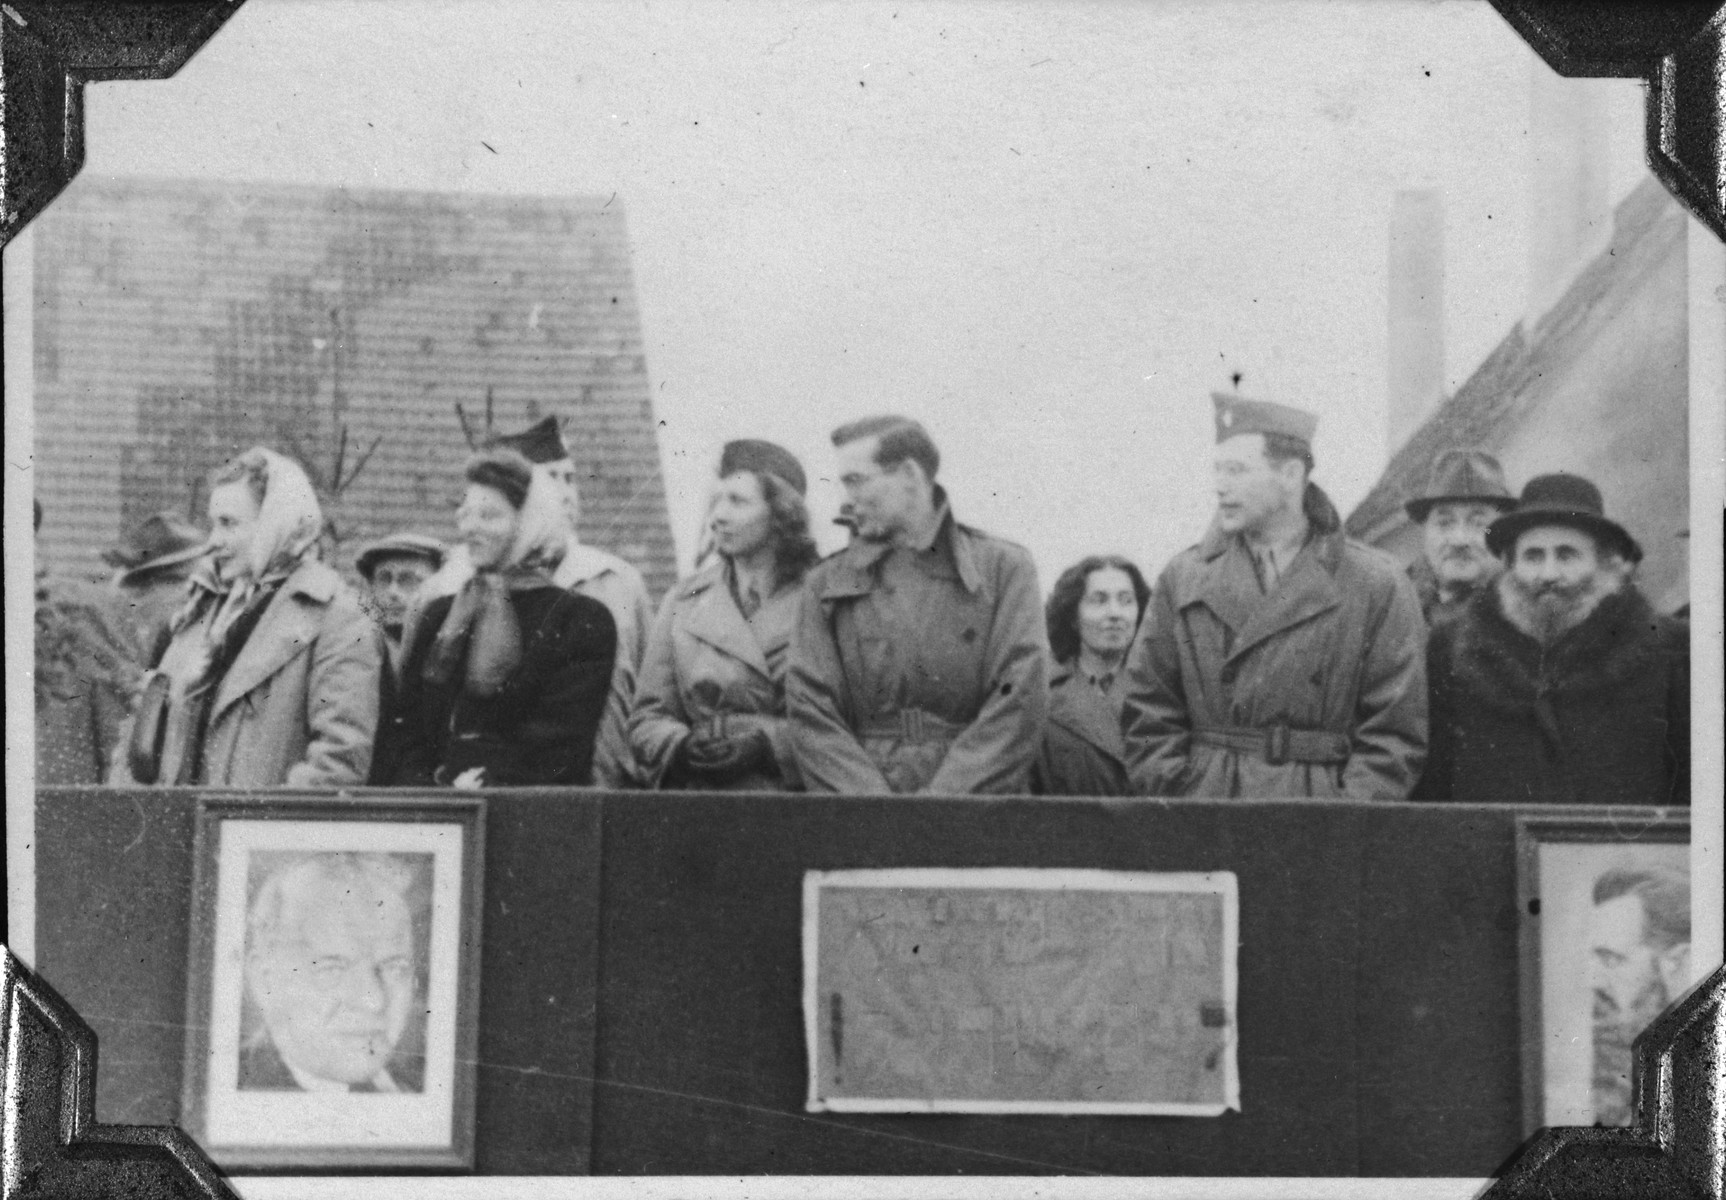 Tony and Marion Pritchard address a Zionist demonstration in the Windsheim displaced persons' camp.

Tony Pritchard addressed the crowd as head of the camp, and his wife Marion (who was not Jewish) provided simultaneous translation into Yiddish.